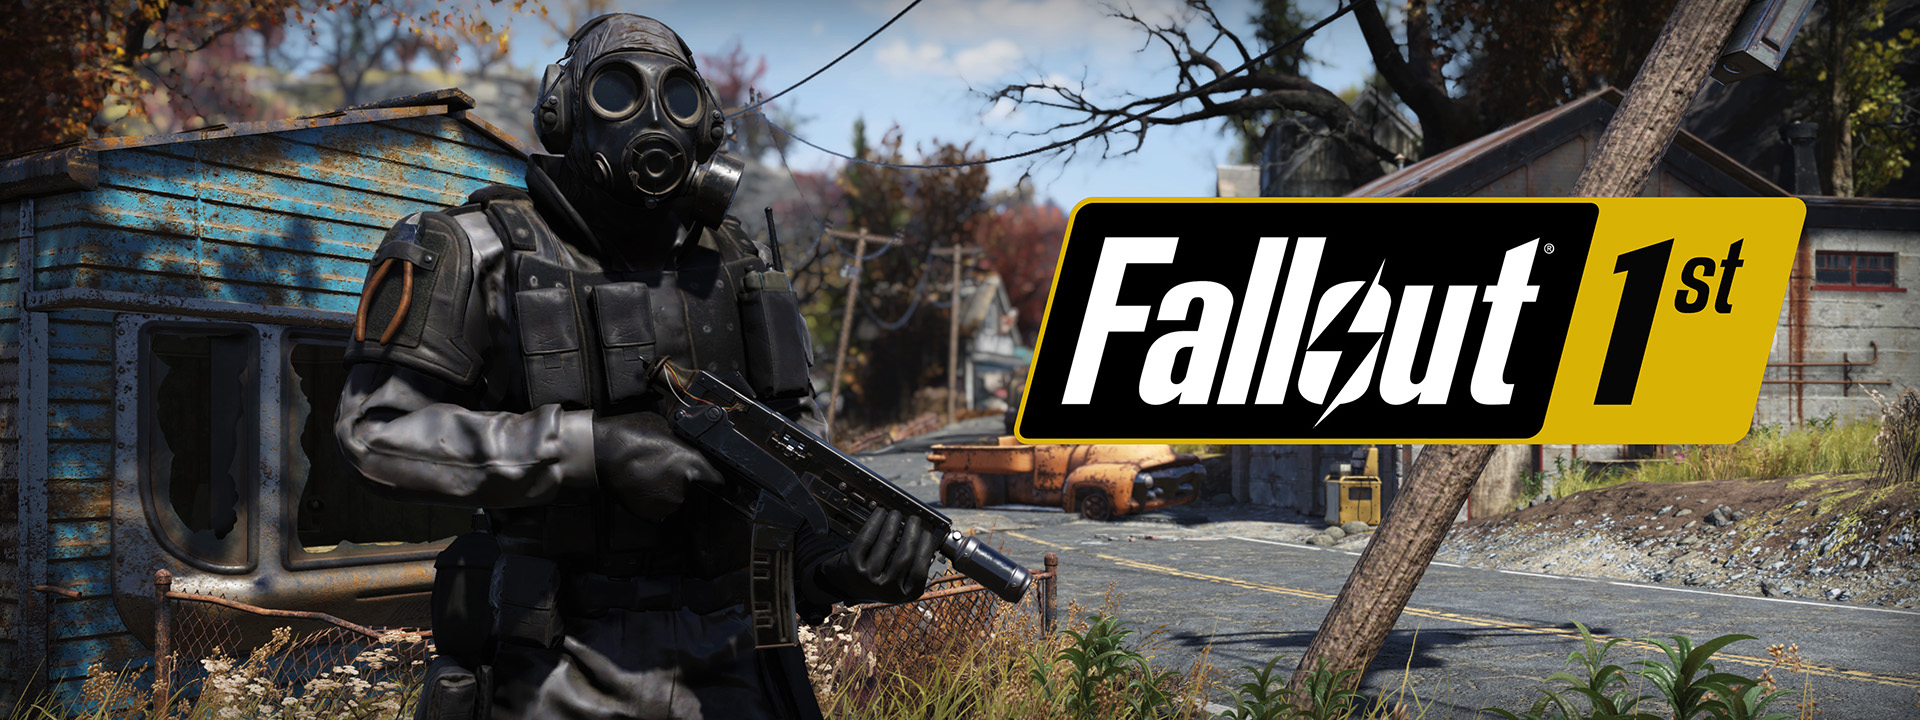 Atomic Shop Update 6th February 2024, Fallout 76 Articles